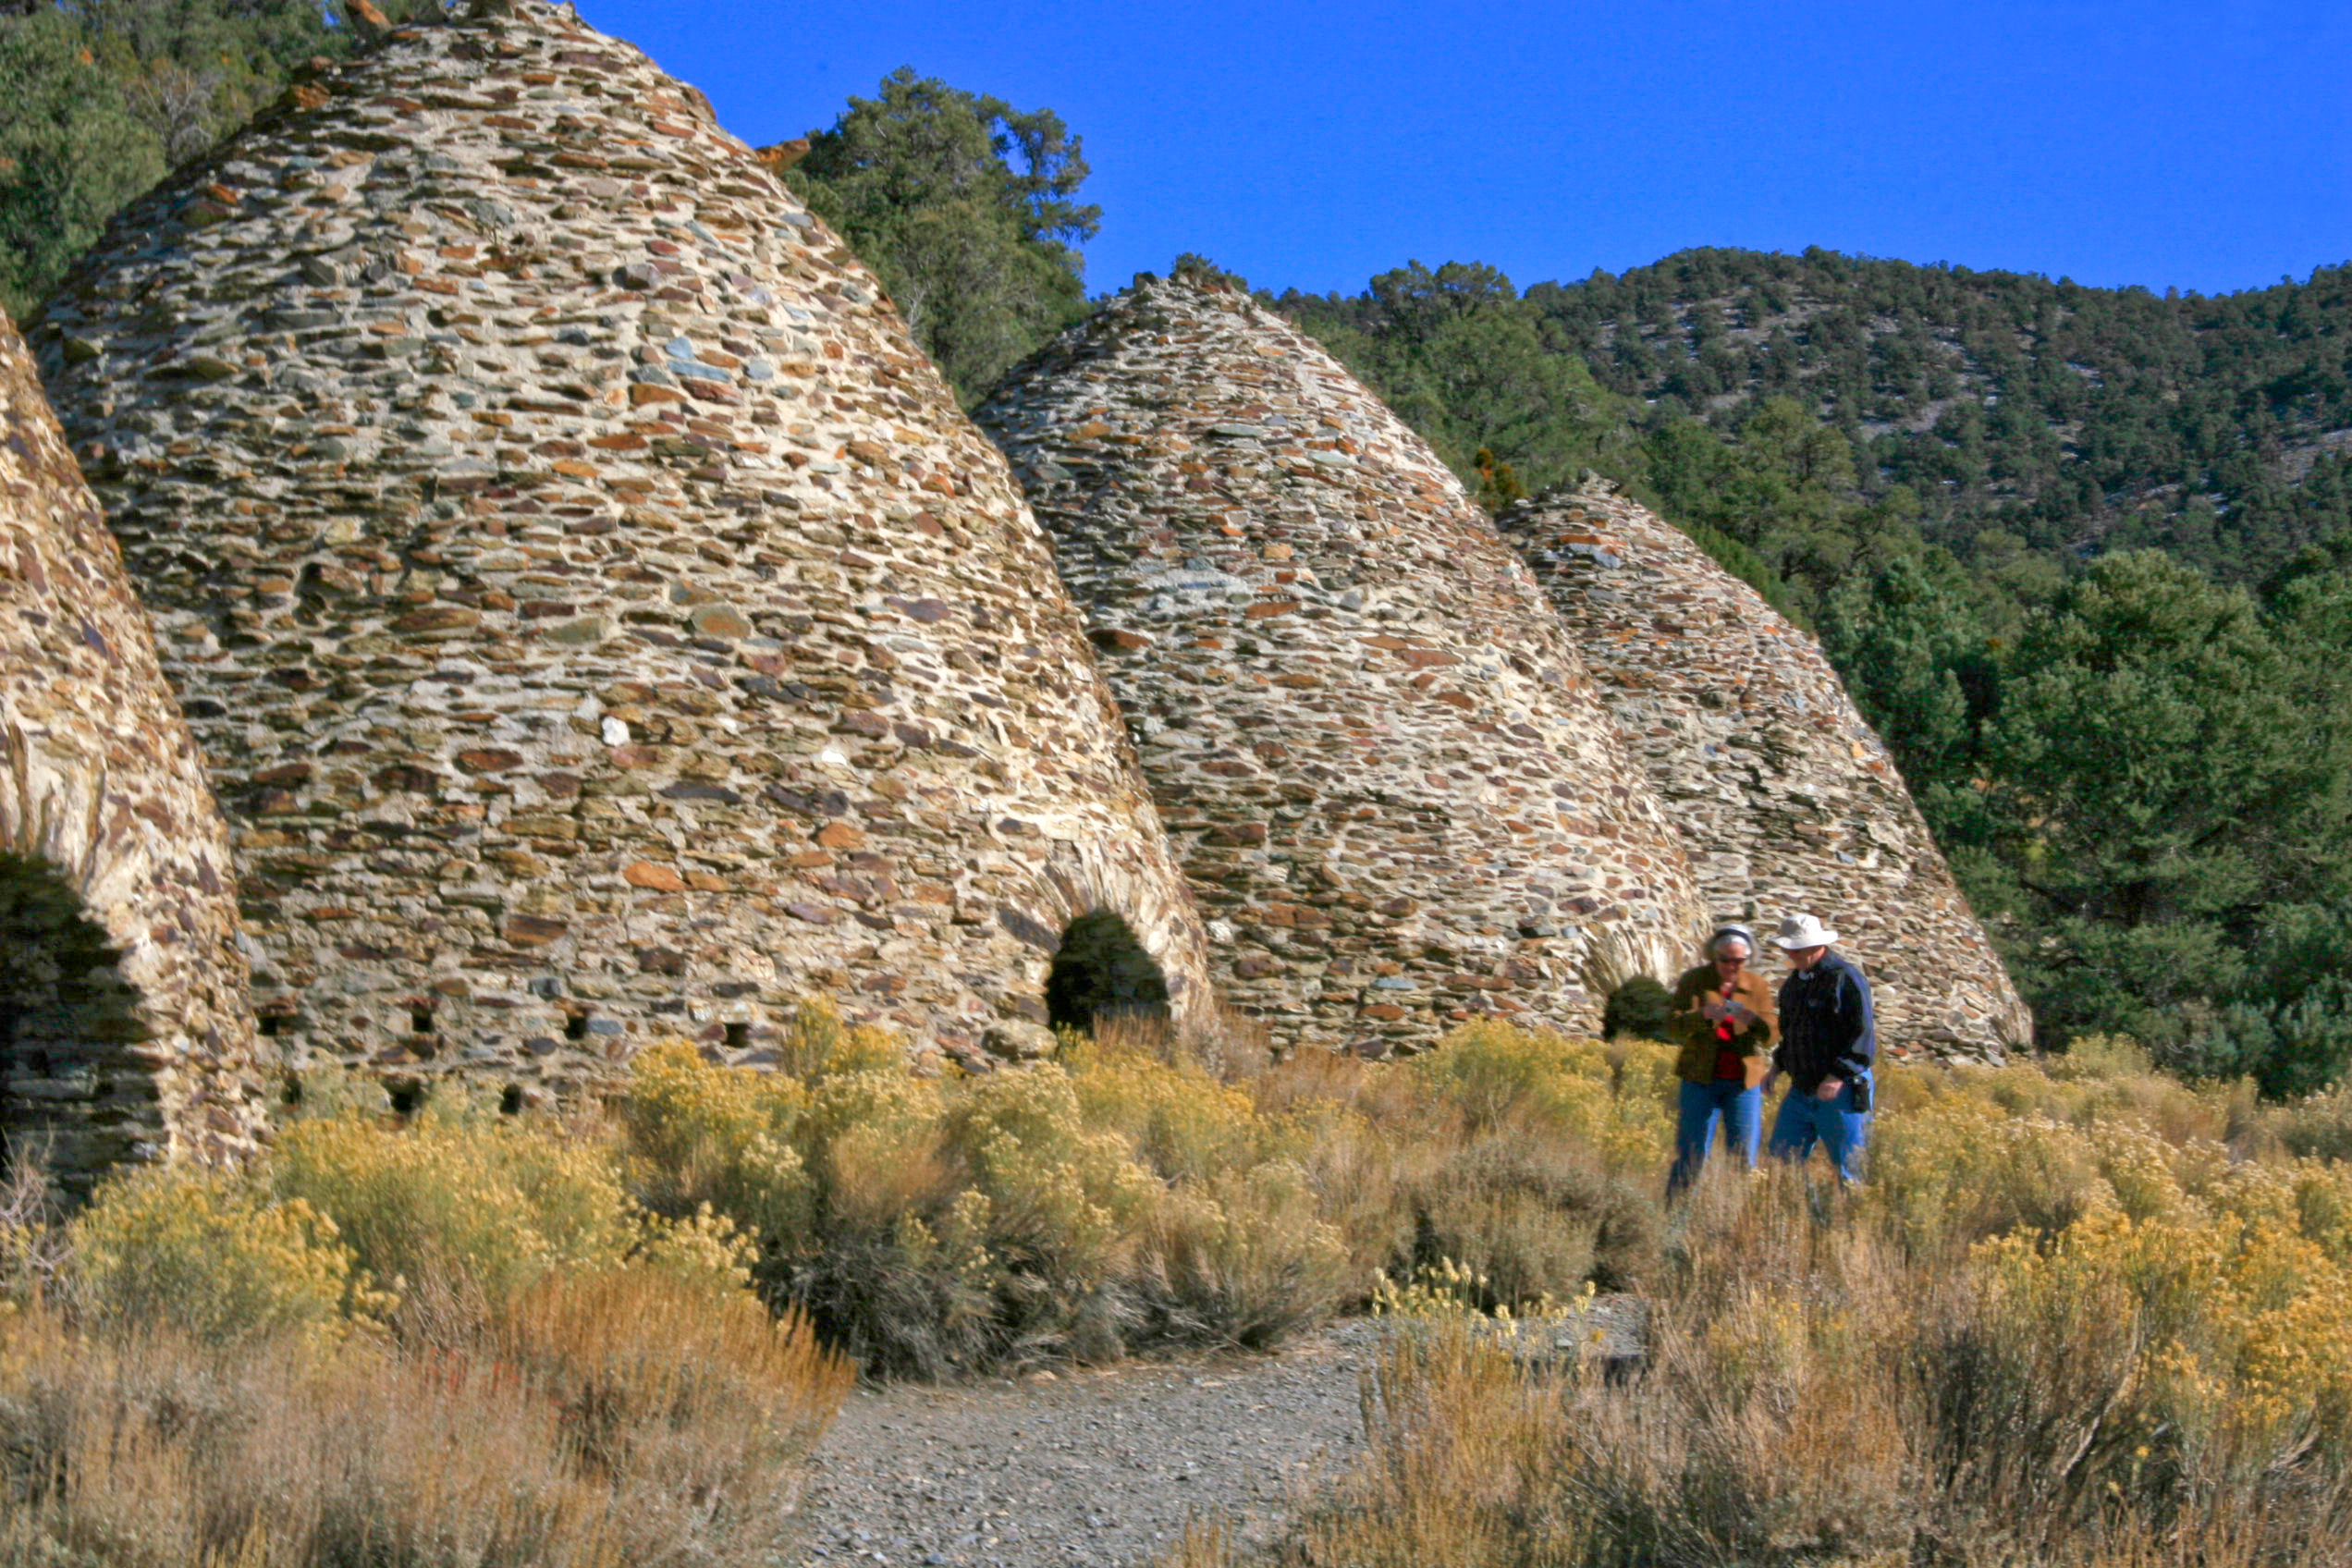 Two people stand near four large stone structures shaped like bee hives.